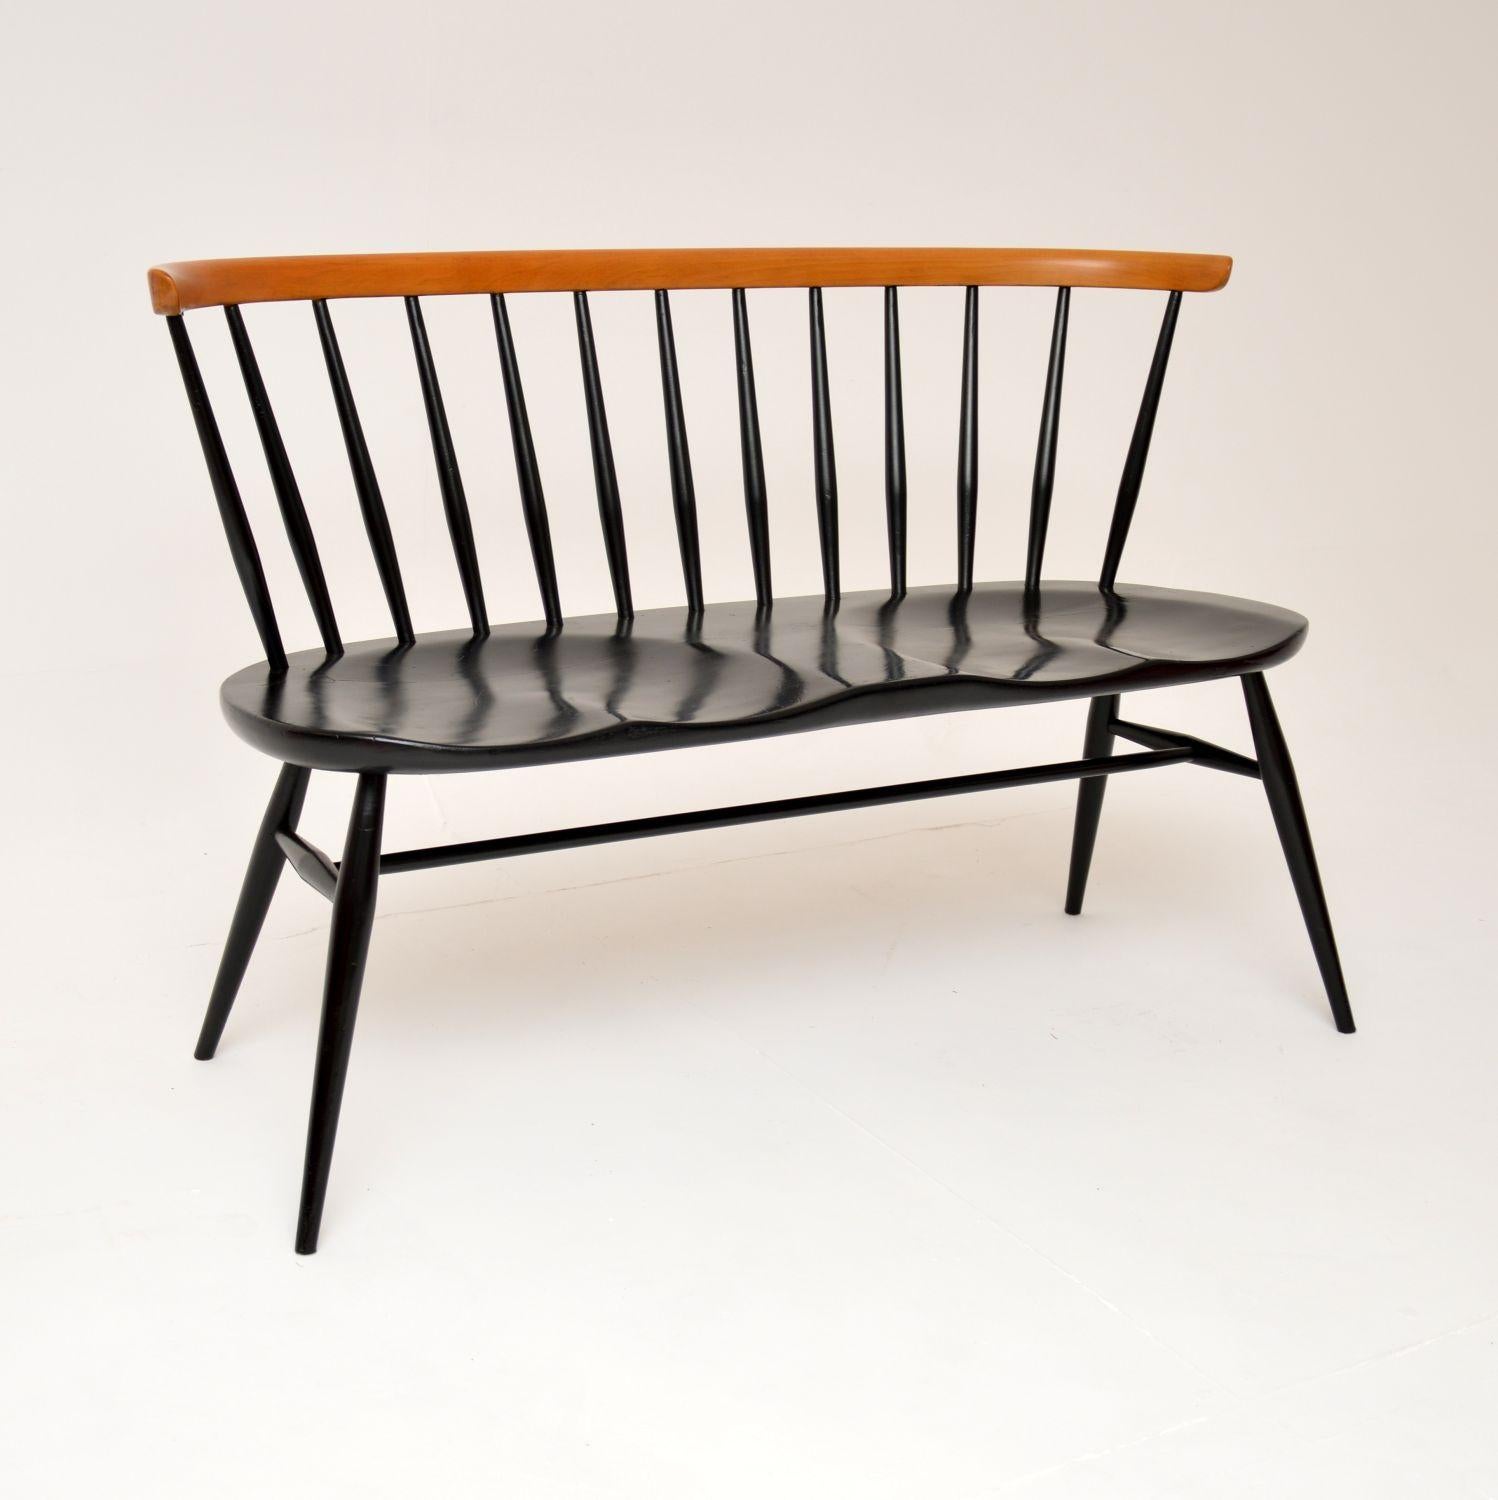 A stunning and iconic design, this original two seat bench is an early model by Ercol. It was made in England, and dates from the 1960’s.

It is of amazing quality, with an elegant yet sturdy design. The frame is solid elm and is mostly ebonised,